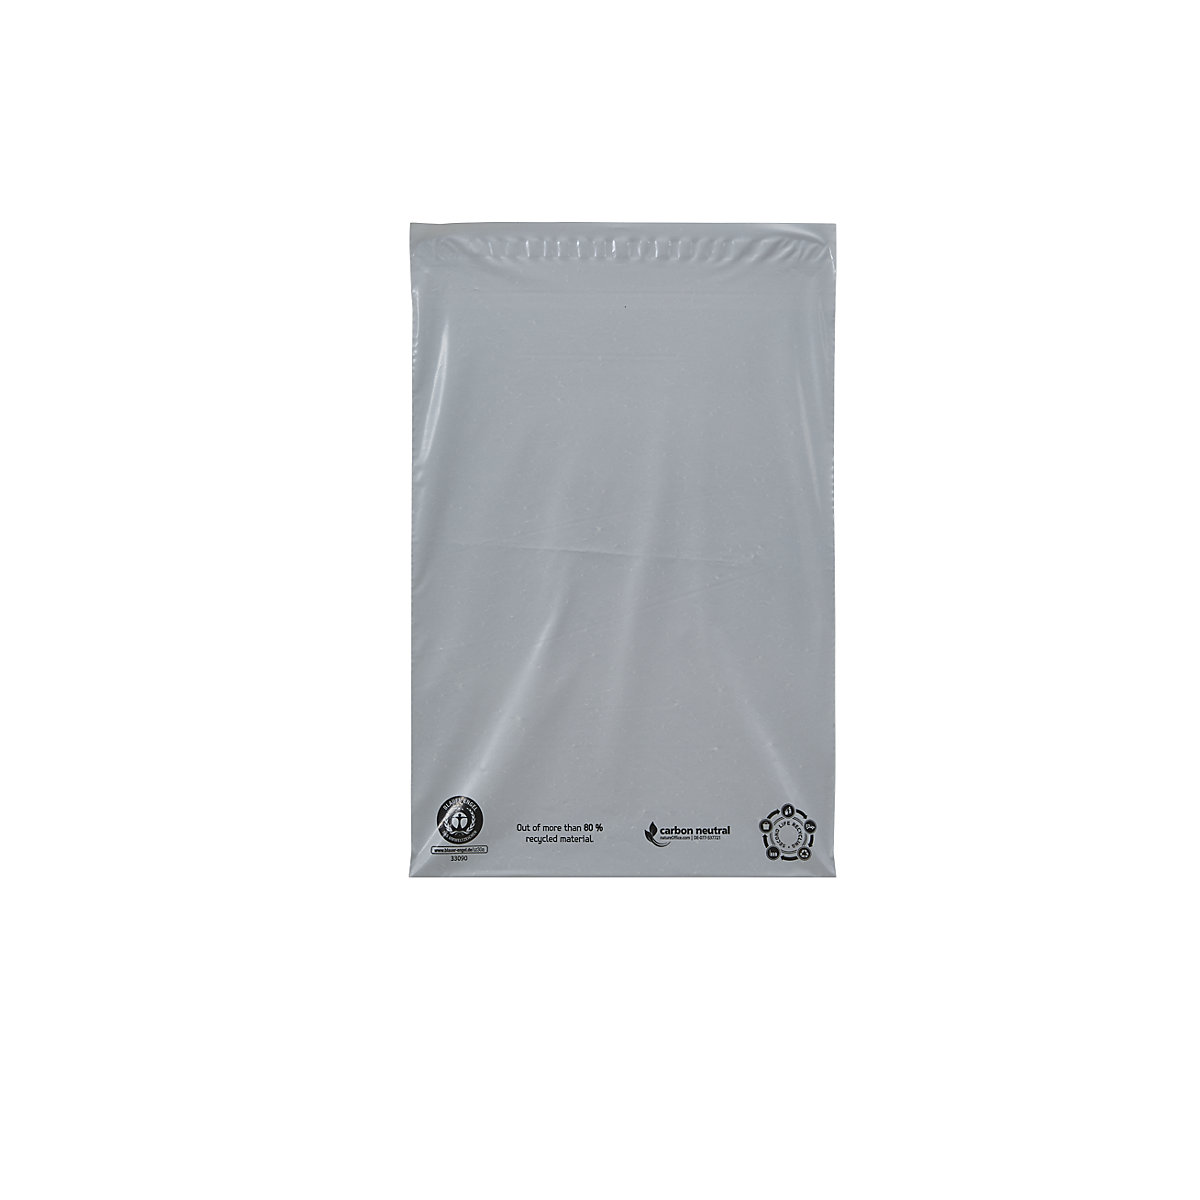 Dispatch bag, non-transparent, film thickness 60 µm, LxW 325 x 245 mm, pack of 1000-7